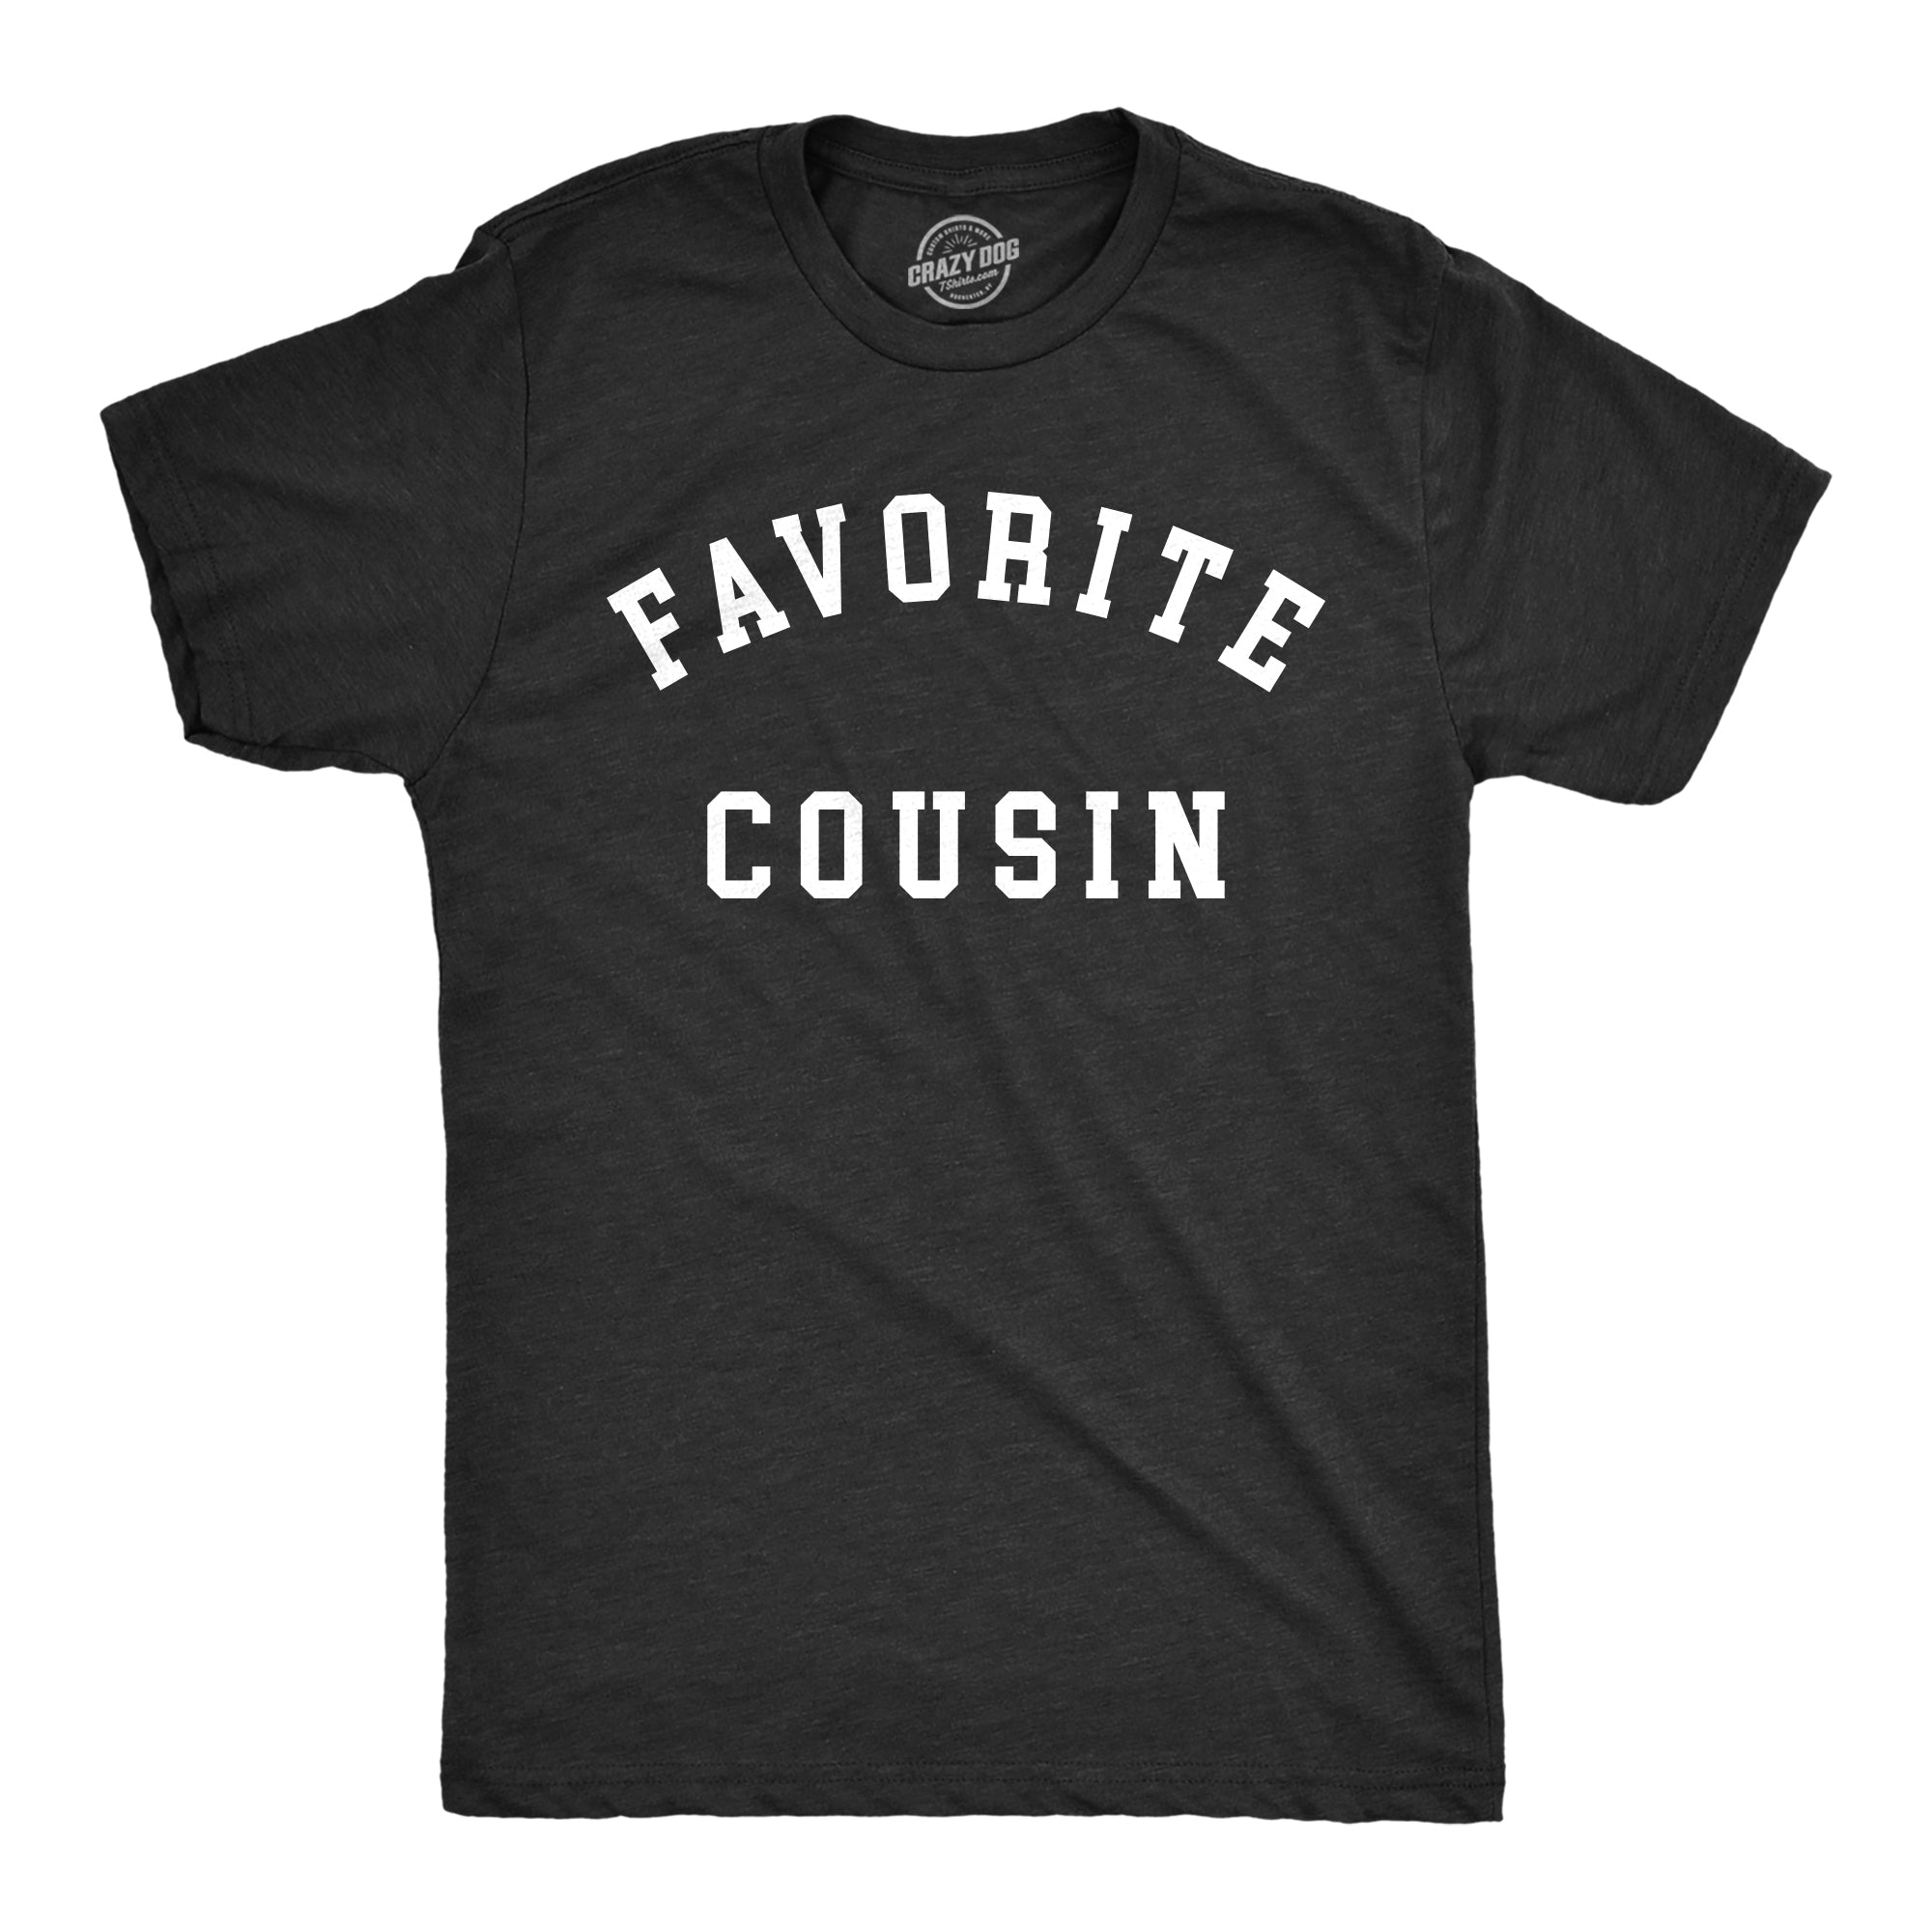 Funny Heather Black - Favorite Cousin Favorite Cousin Mens T Shirt Nerdy Sarcastic Tee